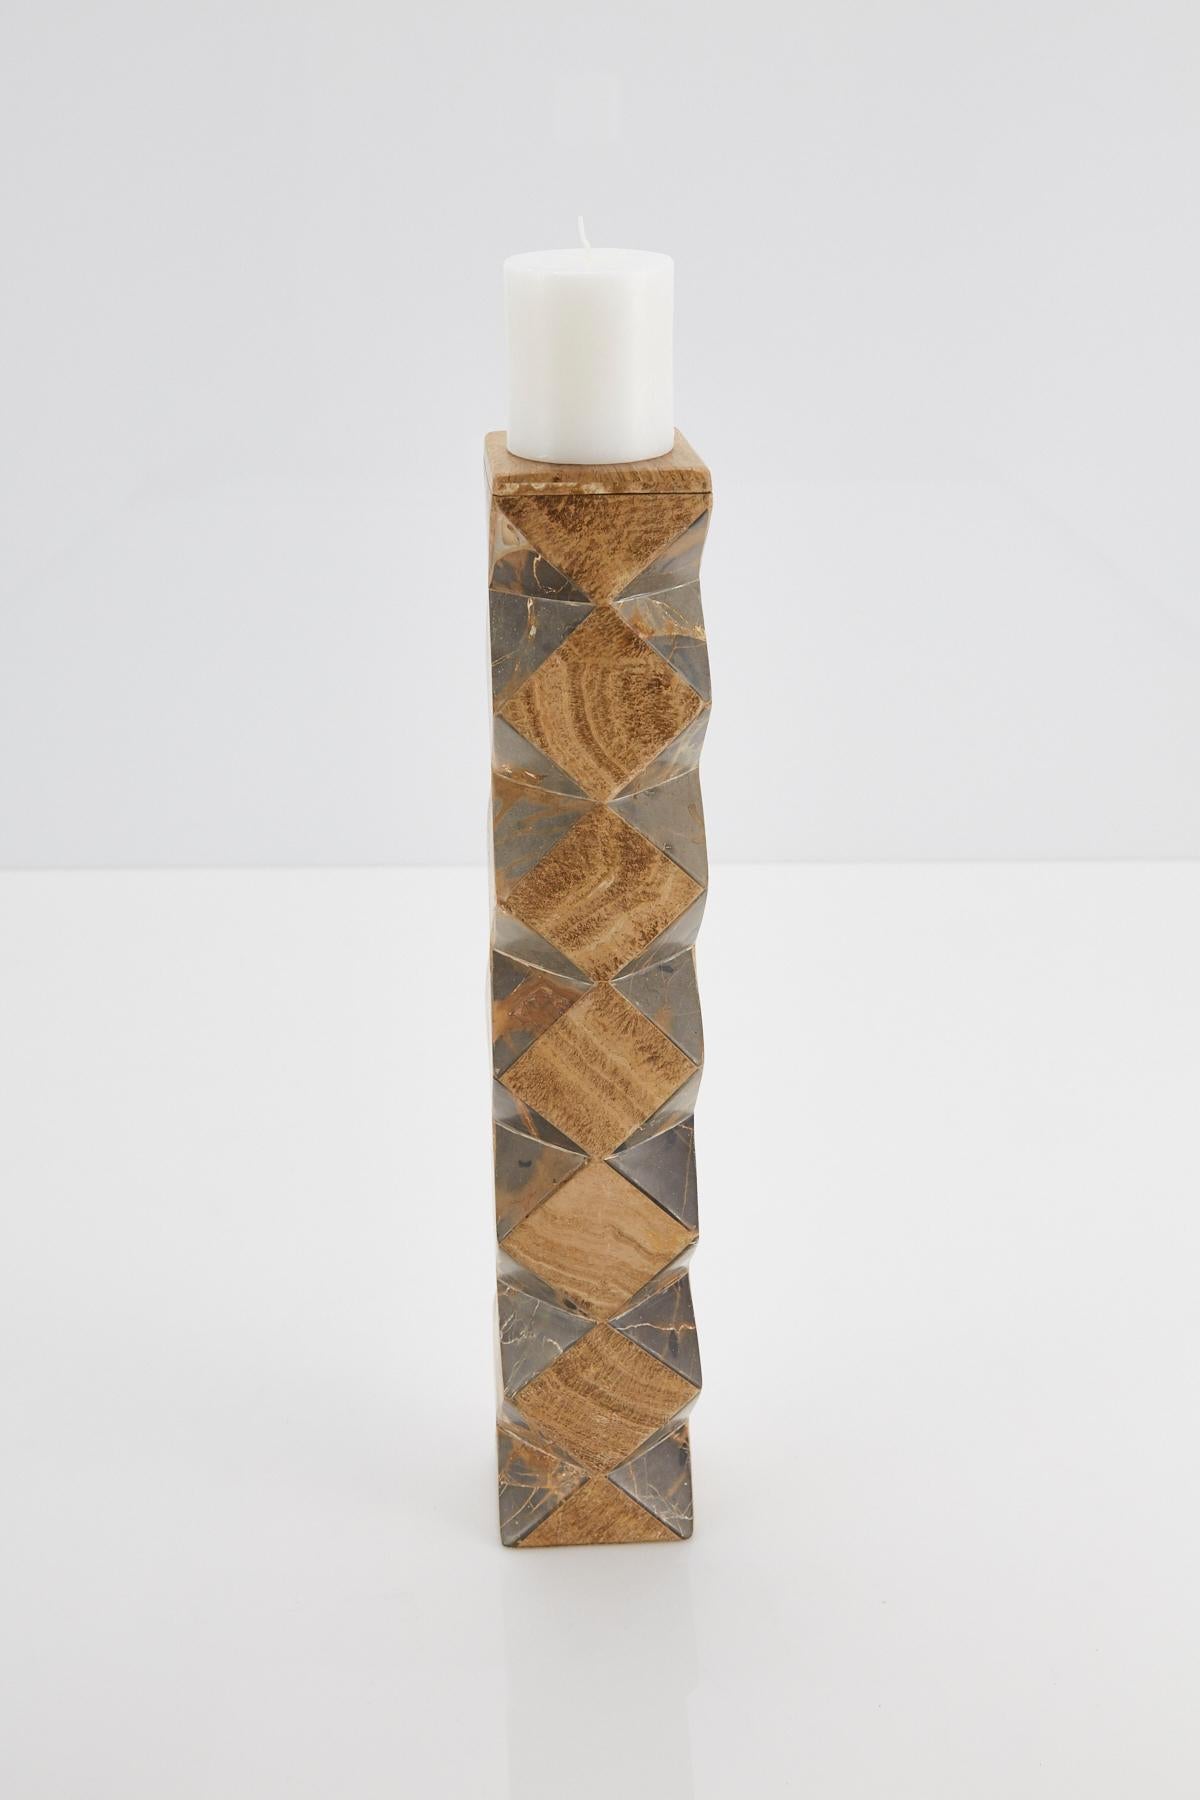 Post-Modern Tall Convertible Faceted Postmodern Tessellated Stone Candlestick or Vase, 1990s For Sale